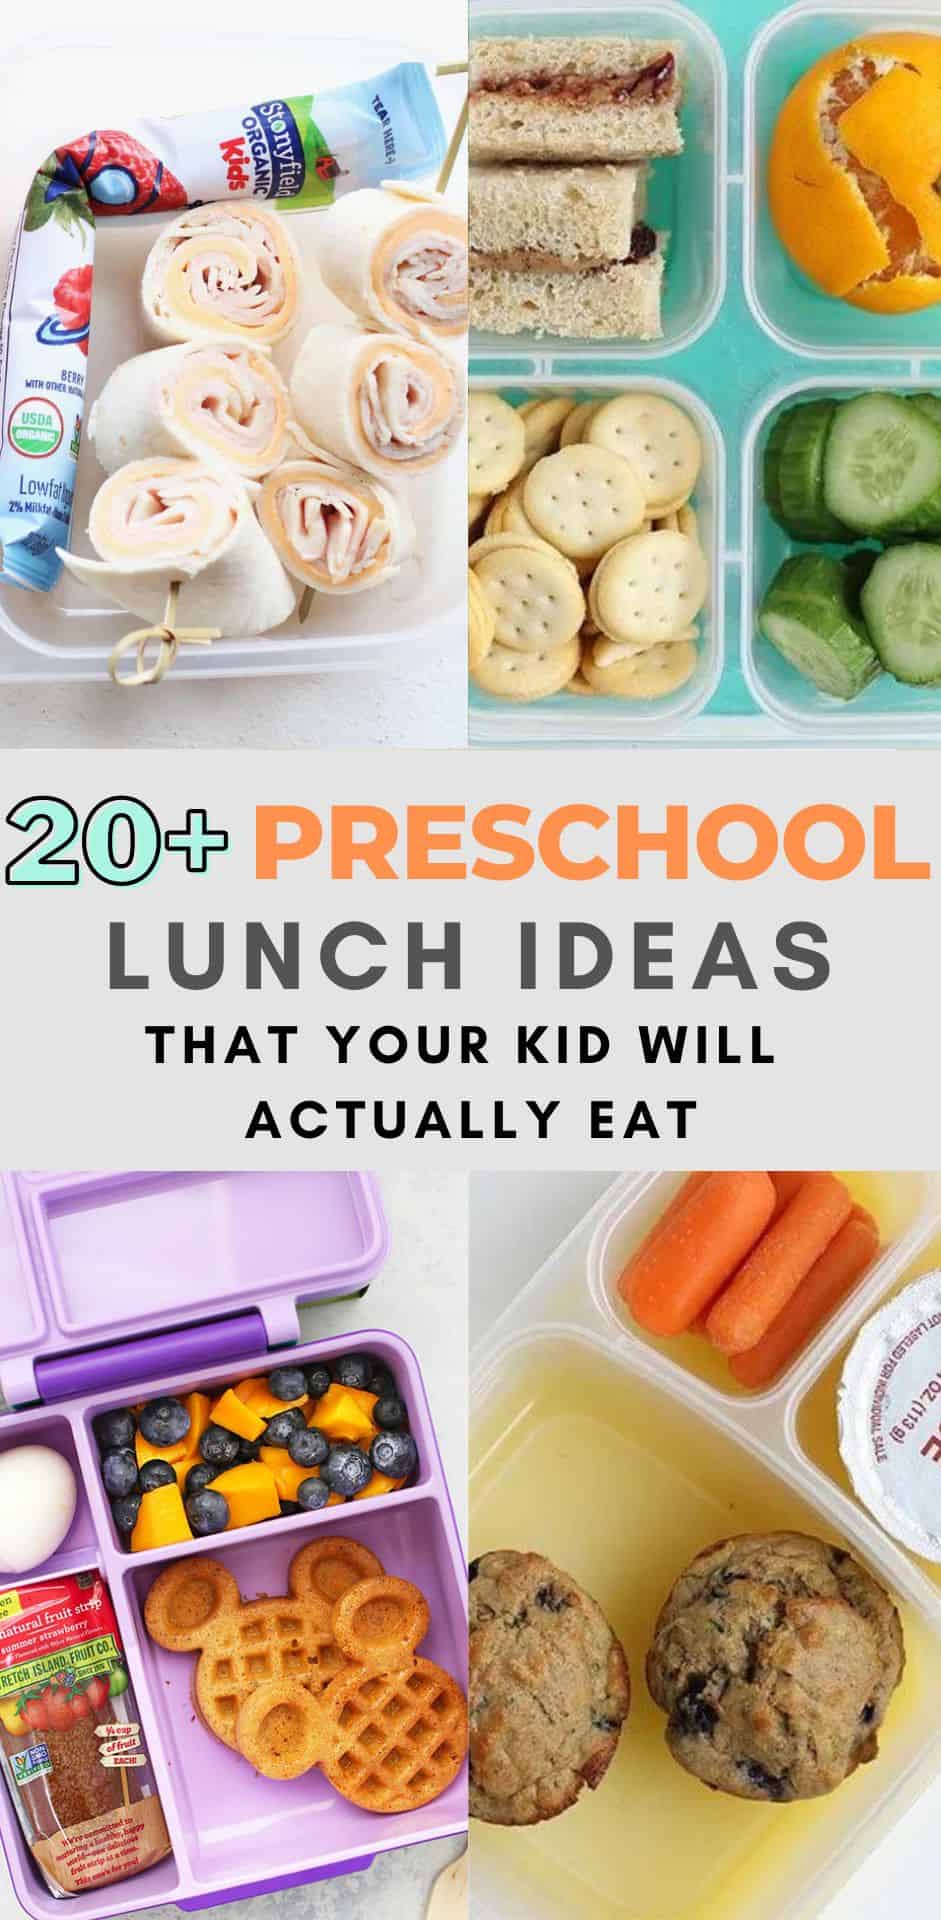 Lunch Ideas for Toddlers at Preschool - Oh Happy Joy!